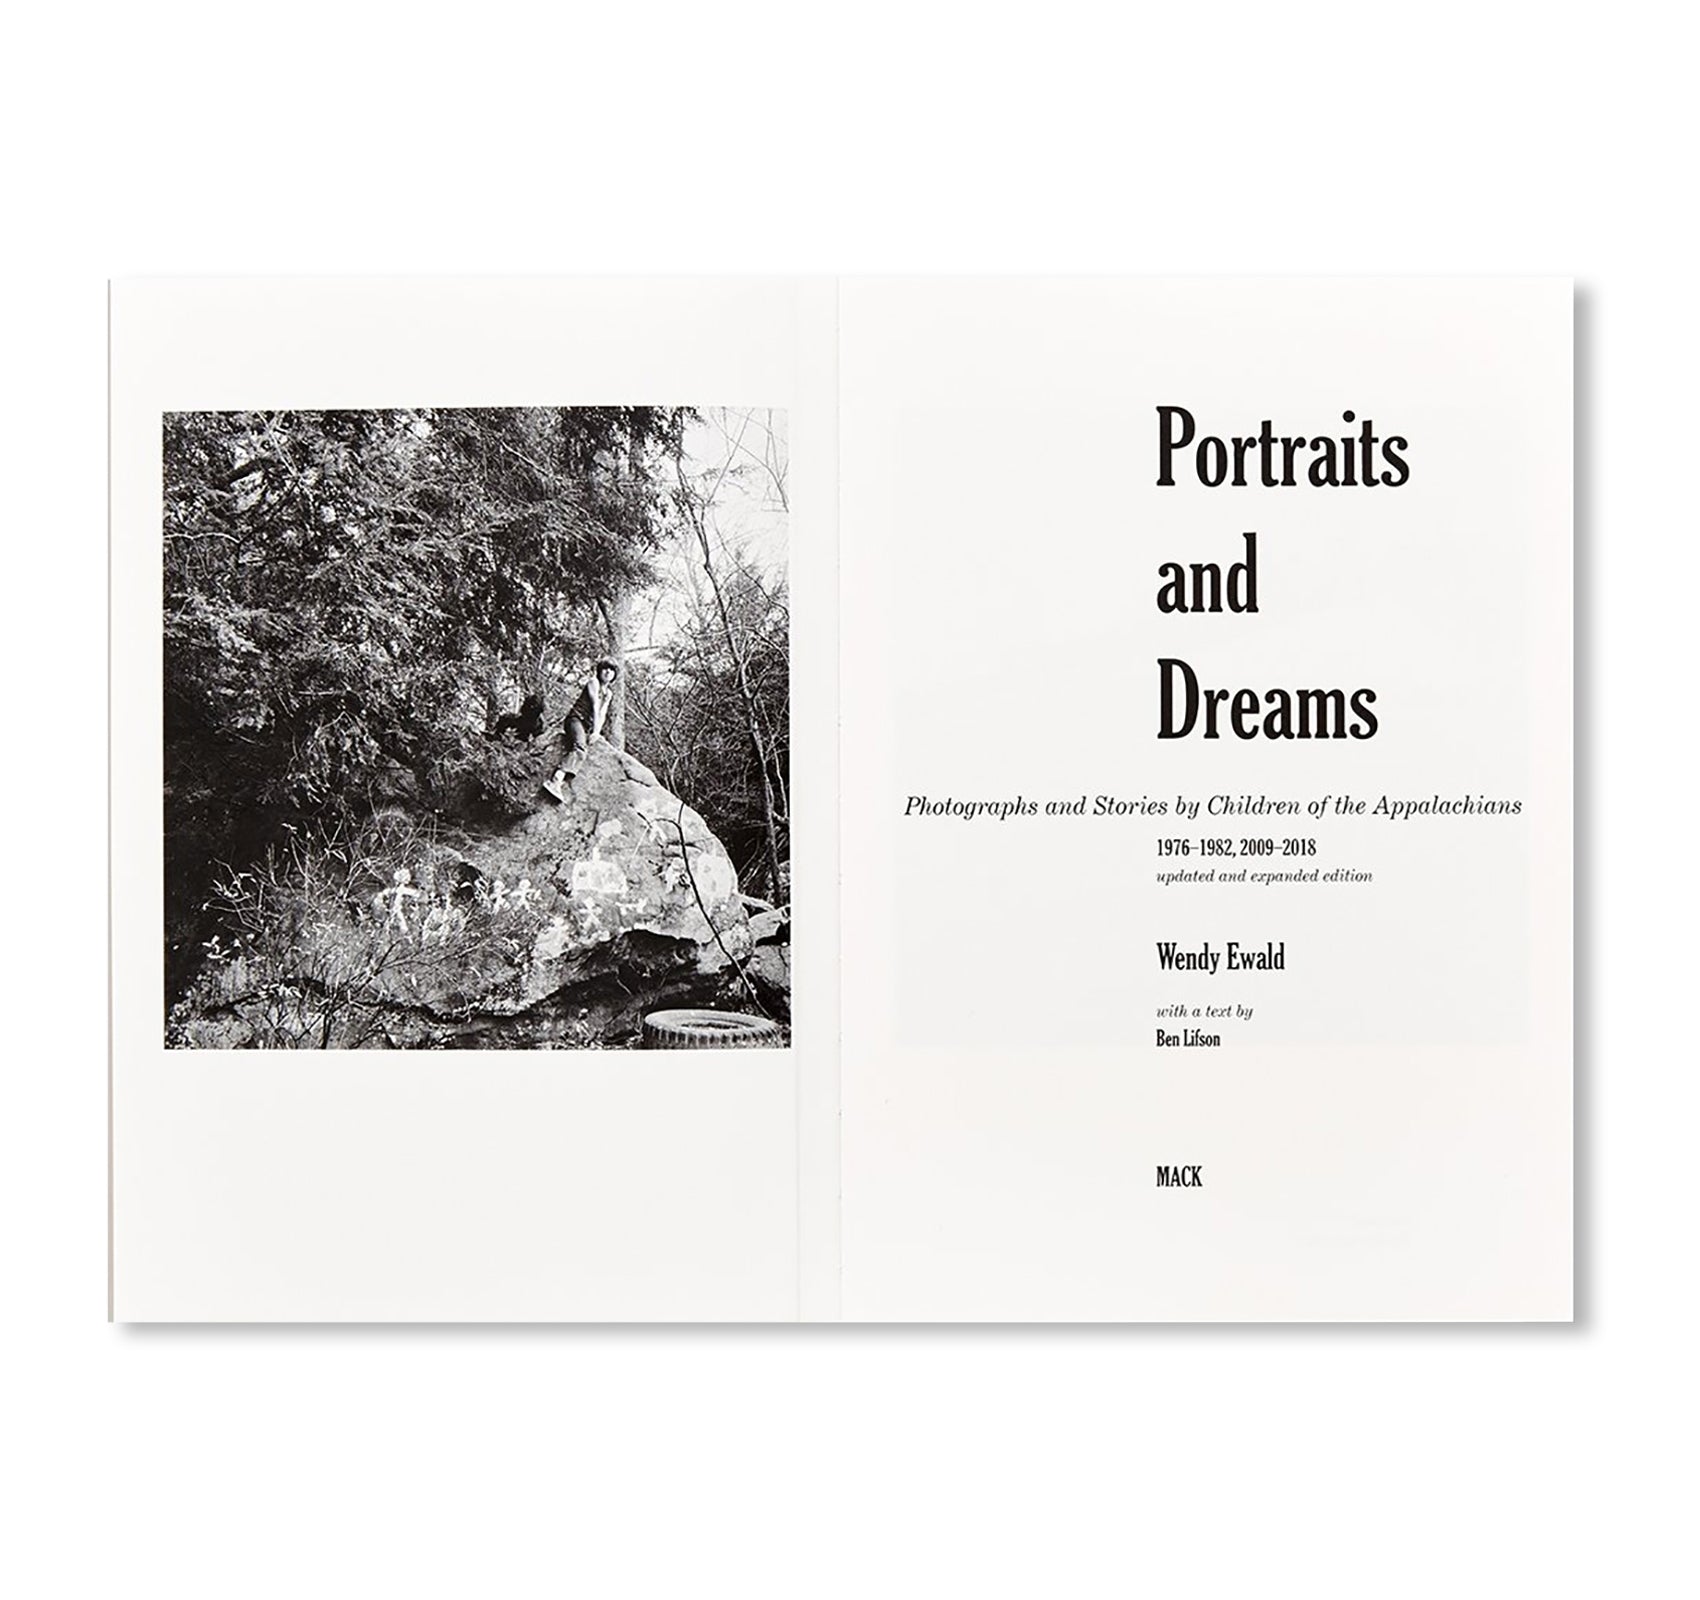 PORTRAITS AND DREAMS by Wendy Ewald